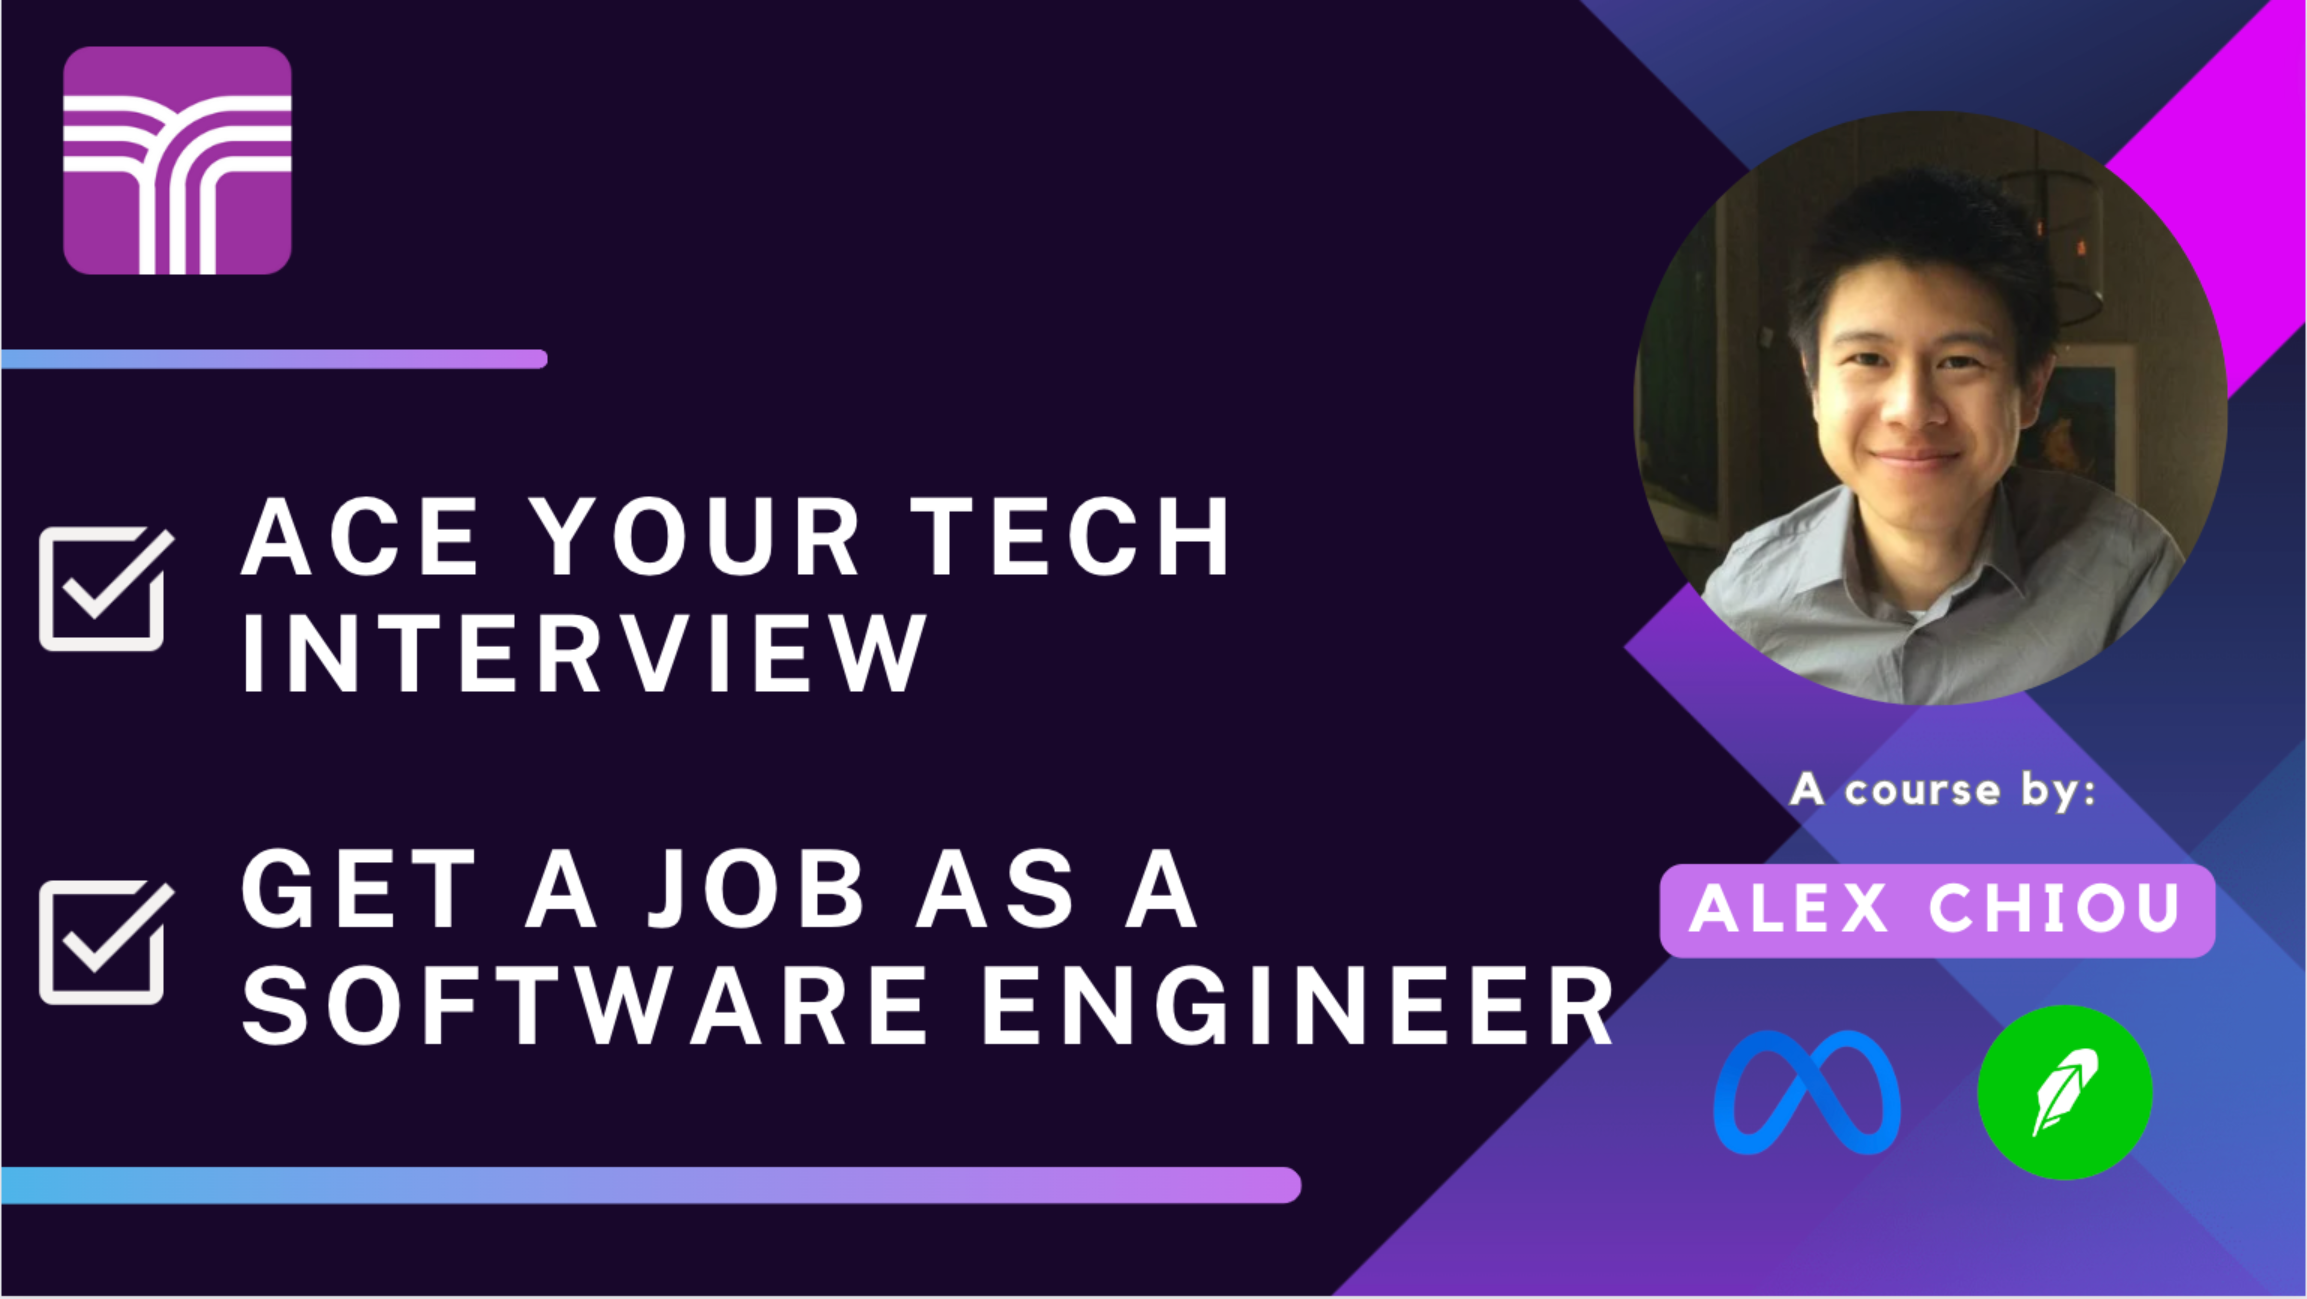 Ace Your Tech Interview And Get A Job As A Software Engineer course image